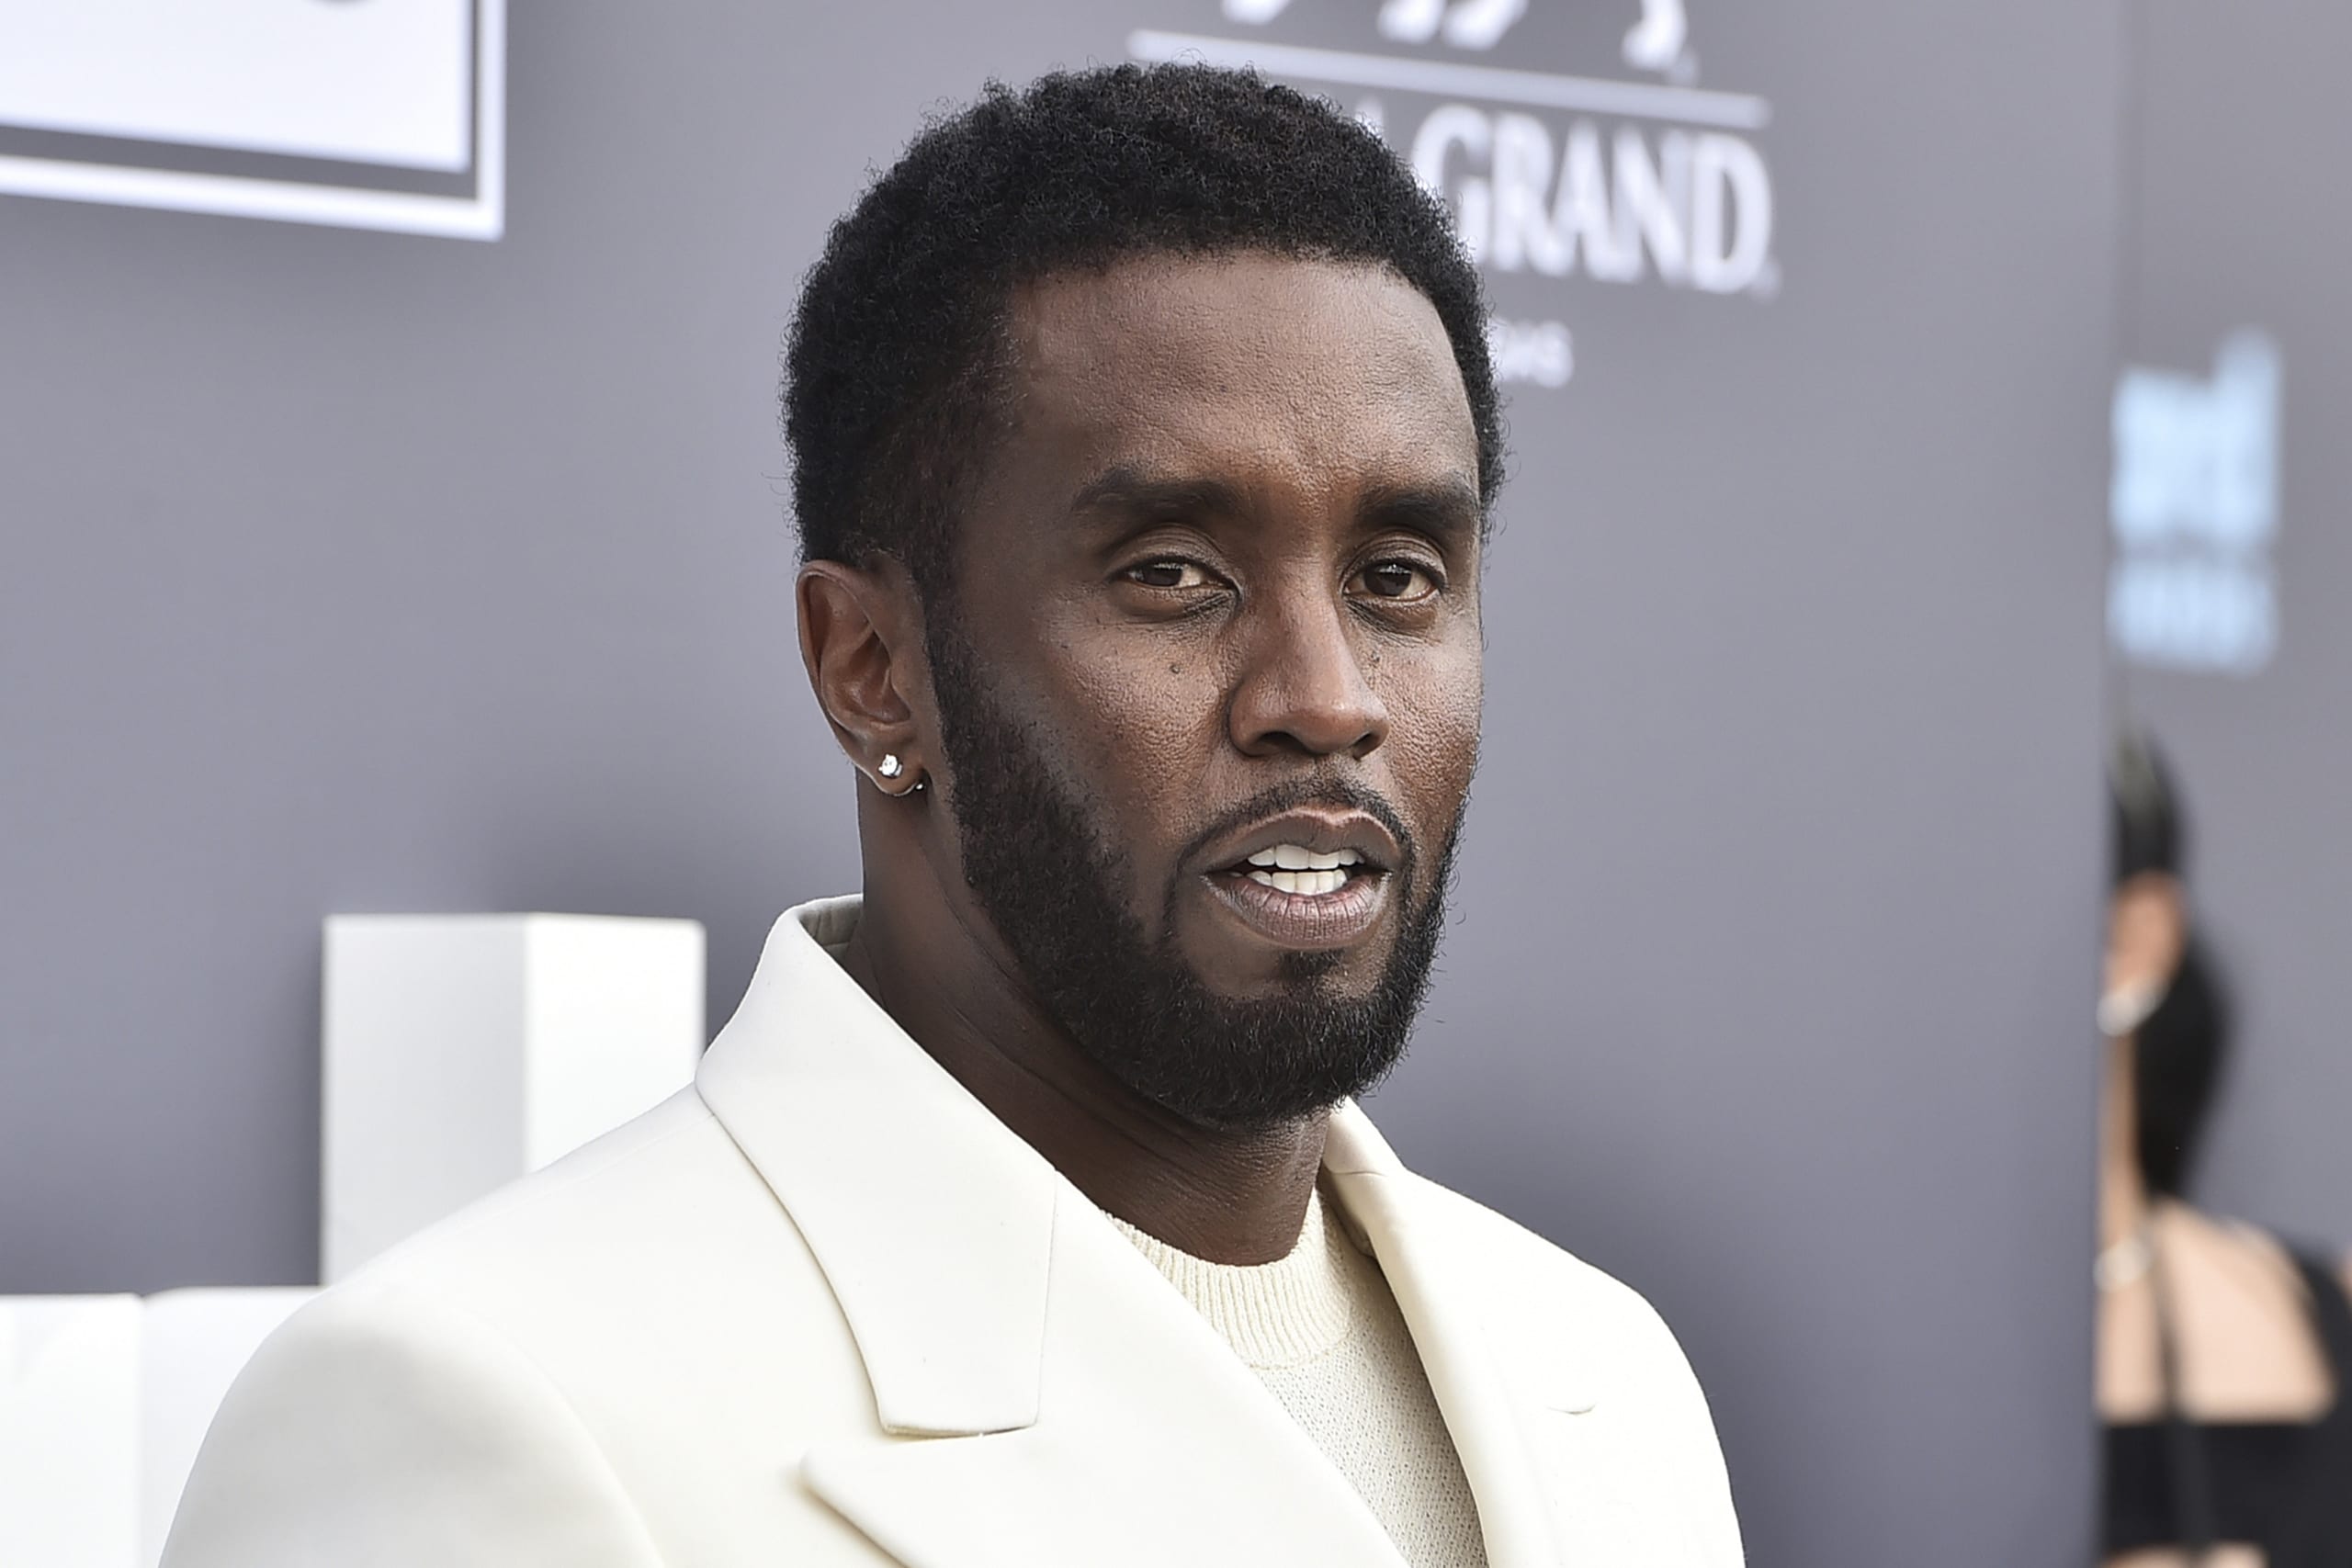 Sean ‘Diddy’ Combs accused of years of rape, abuse by singer Cassie in lawsuit